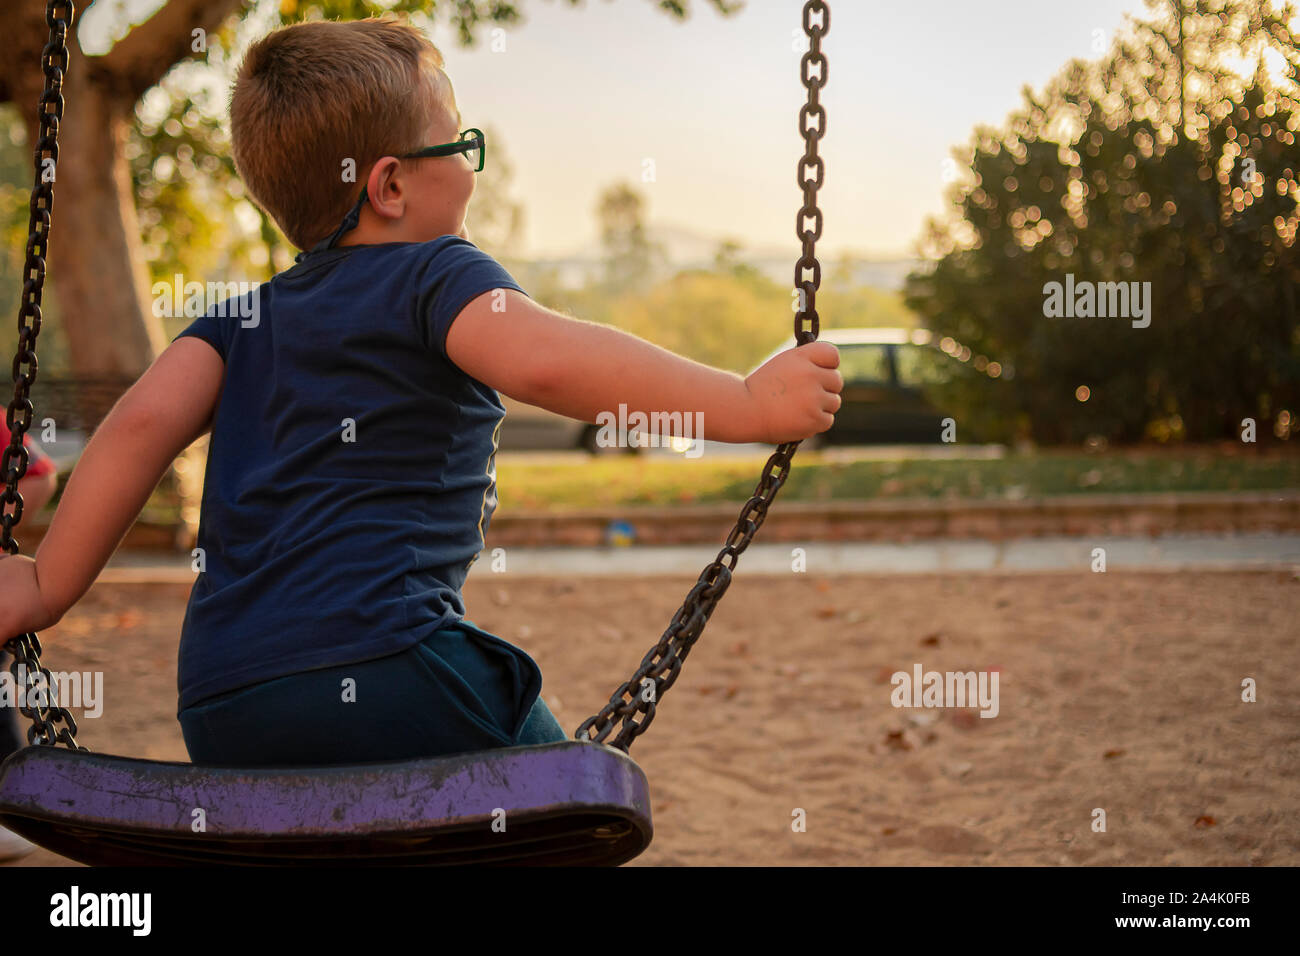 Blonde boy with his glasses swinging at the park Stock Photo